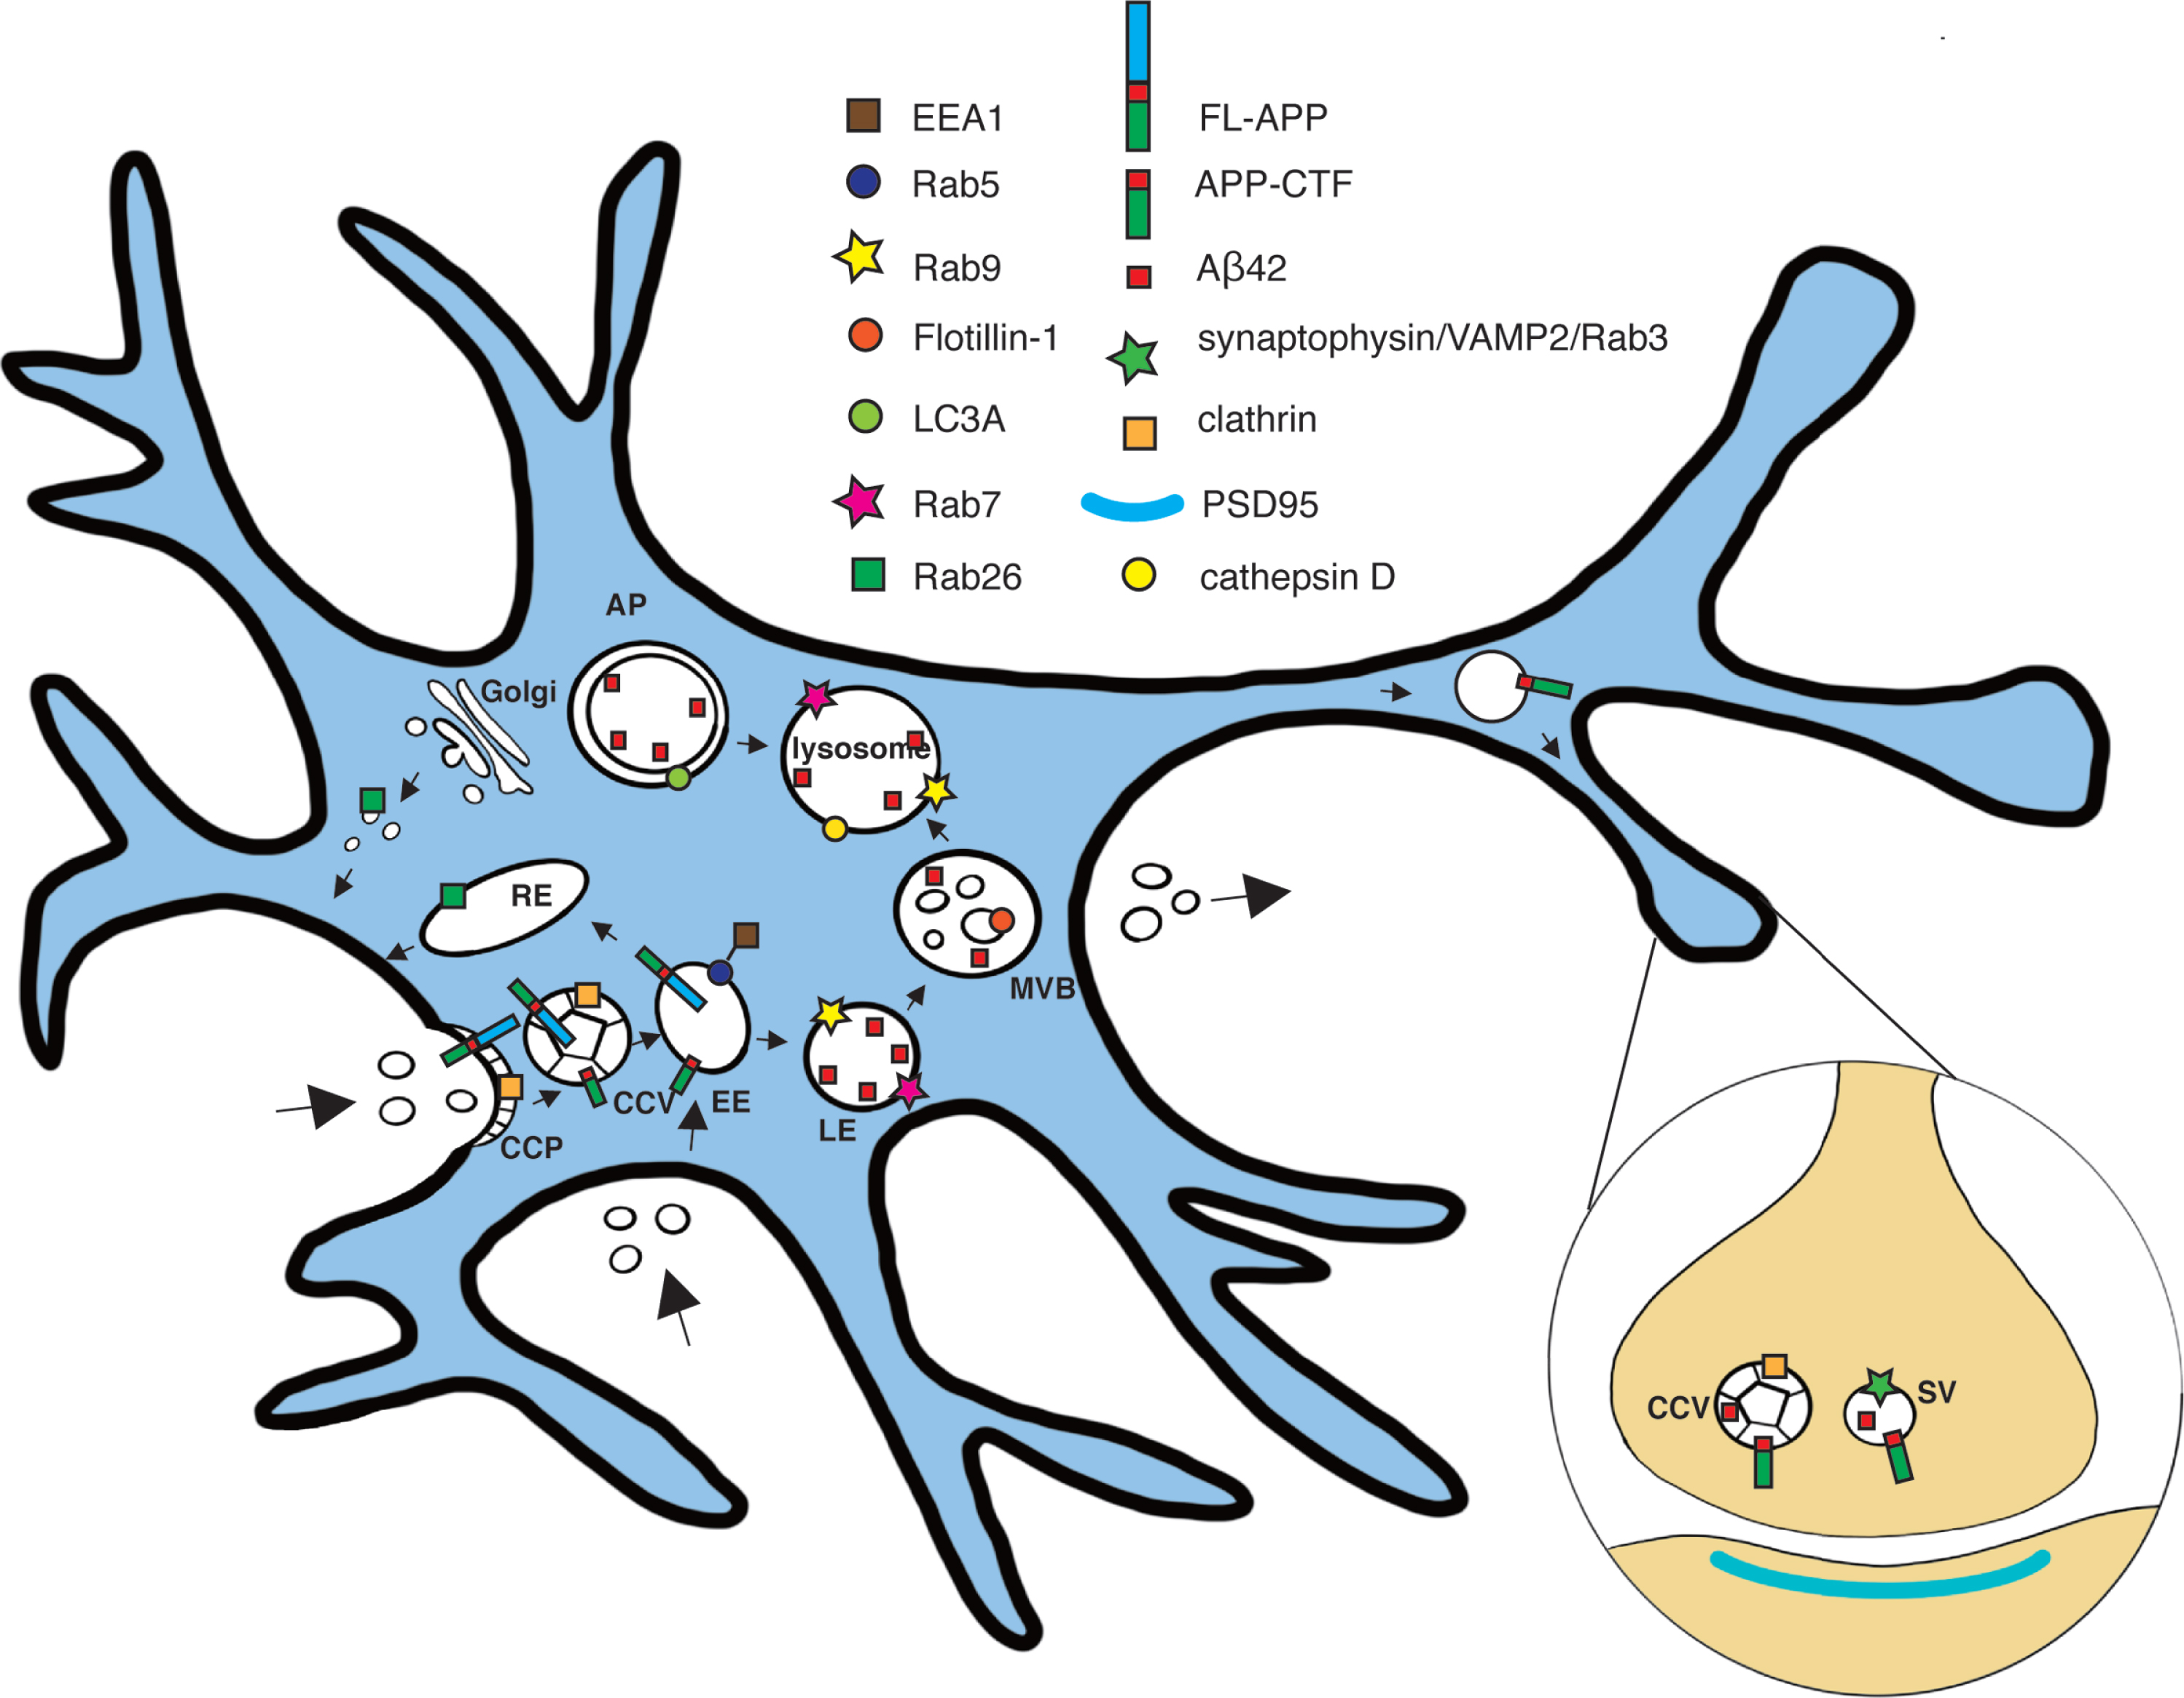 Scheme of subcellular localization of full-length AβPP, CTFs, and/or Aβ42 in hippocampal neurons. The subcellular localization of full-length AβPP (FL-APP), APP-C-terminal fragments (APP-CTF), and Aβ42 in the endocytic-lysosomal system, based on STED imaging of hippocampal neurons, is shown. Early endosome antigen 1 (EEA1); clathrin coated vesicle (CCV); Early endosome (EE); Multi-vesicular body (MVB); Late endosome (LE); Autophagosome (AP); Synaptic vesicle (SV).